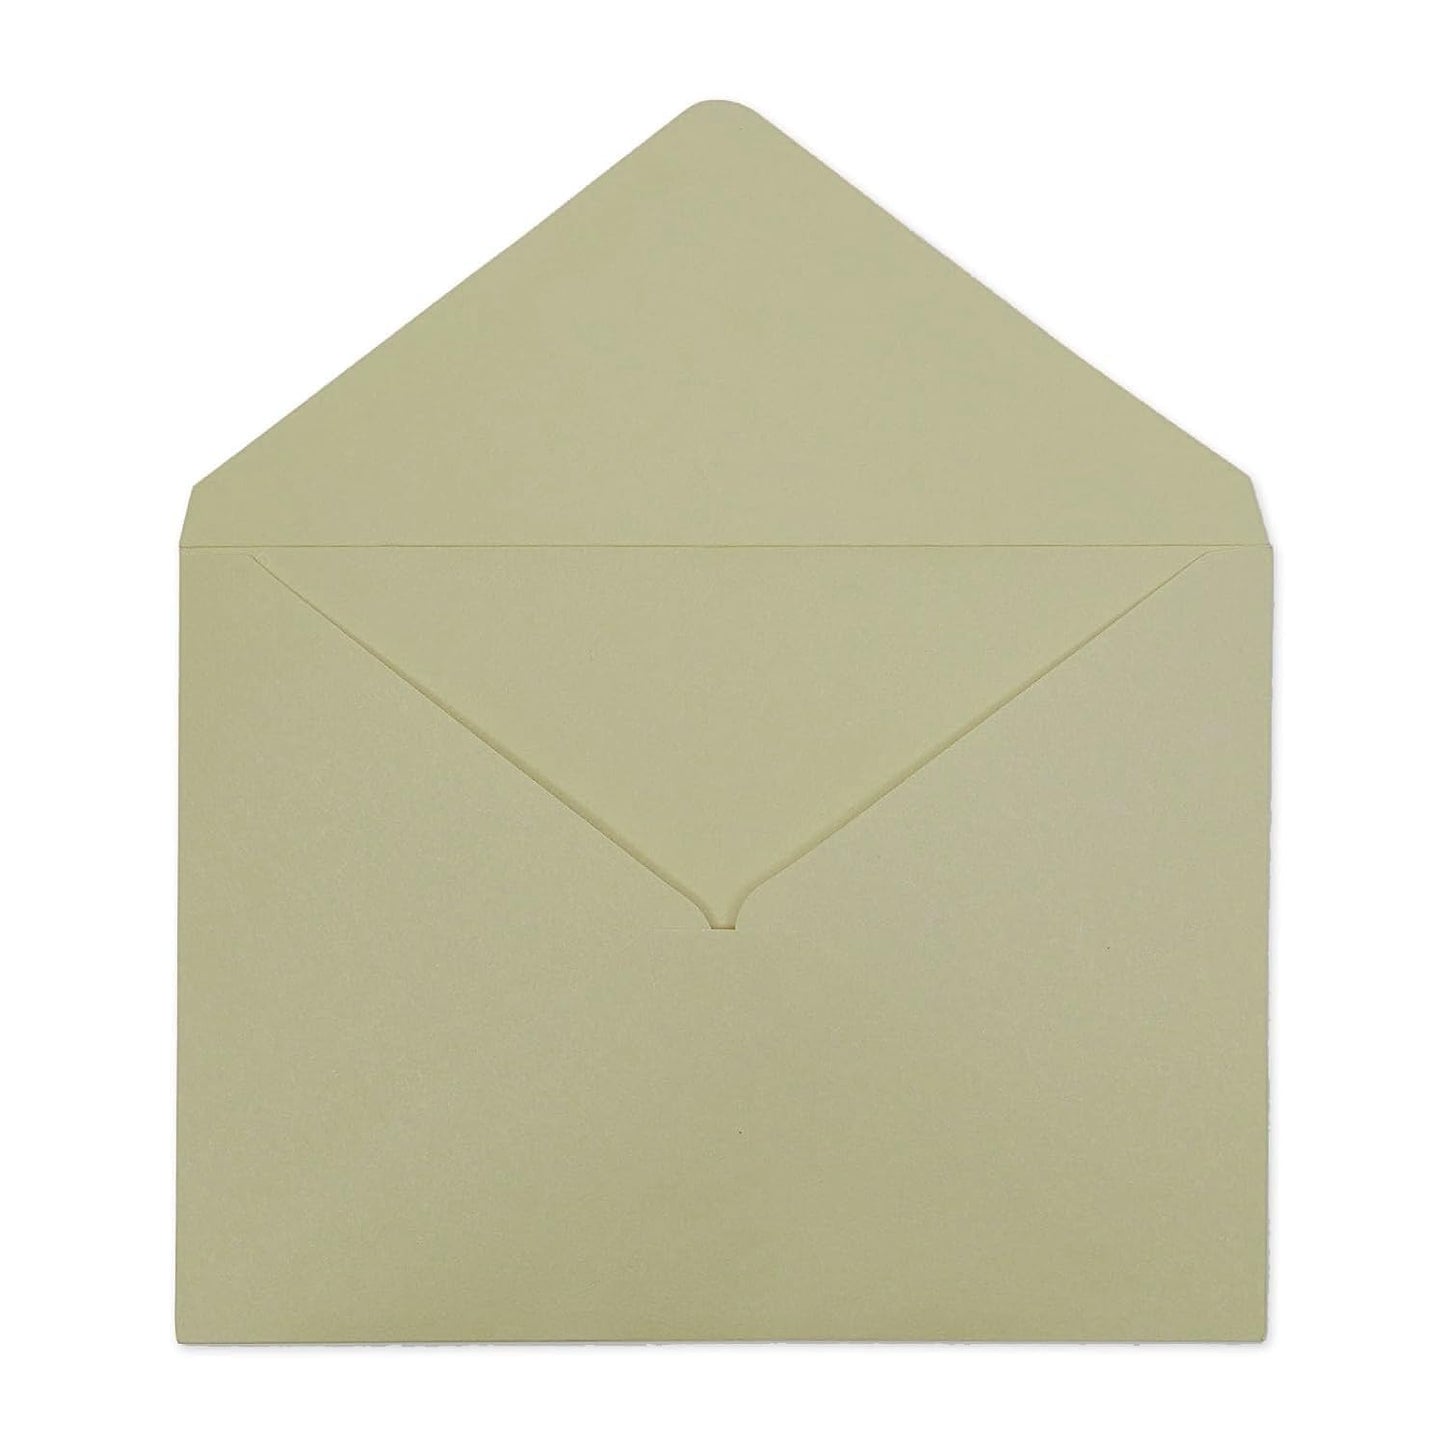 AccuPrints Cream Color color Envelopes Pack of 25 | Size 5.1 by 7.1 inch - Thickness 120 gsm